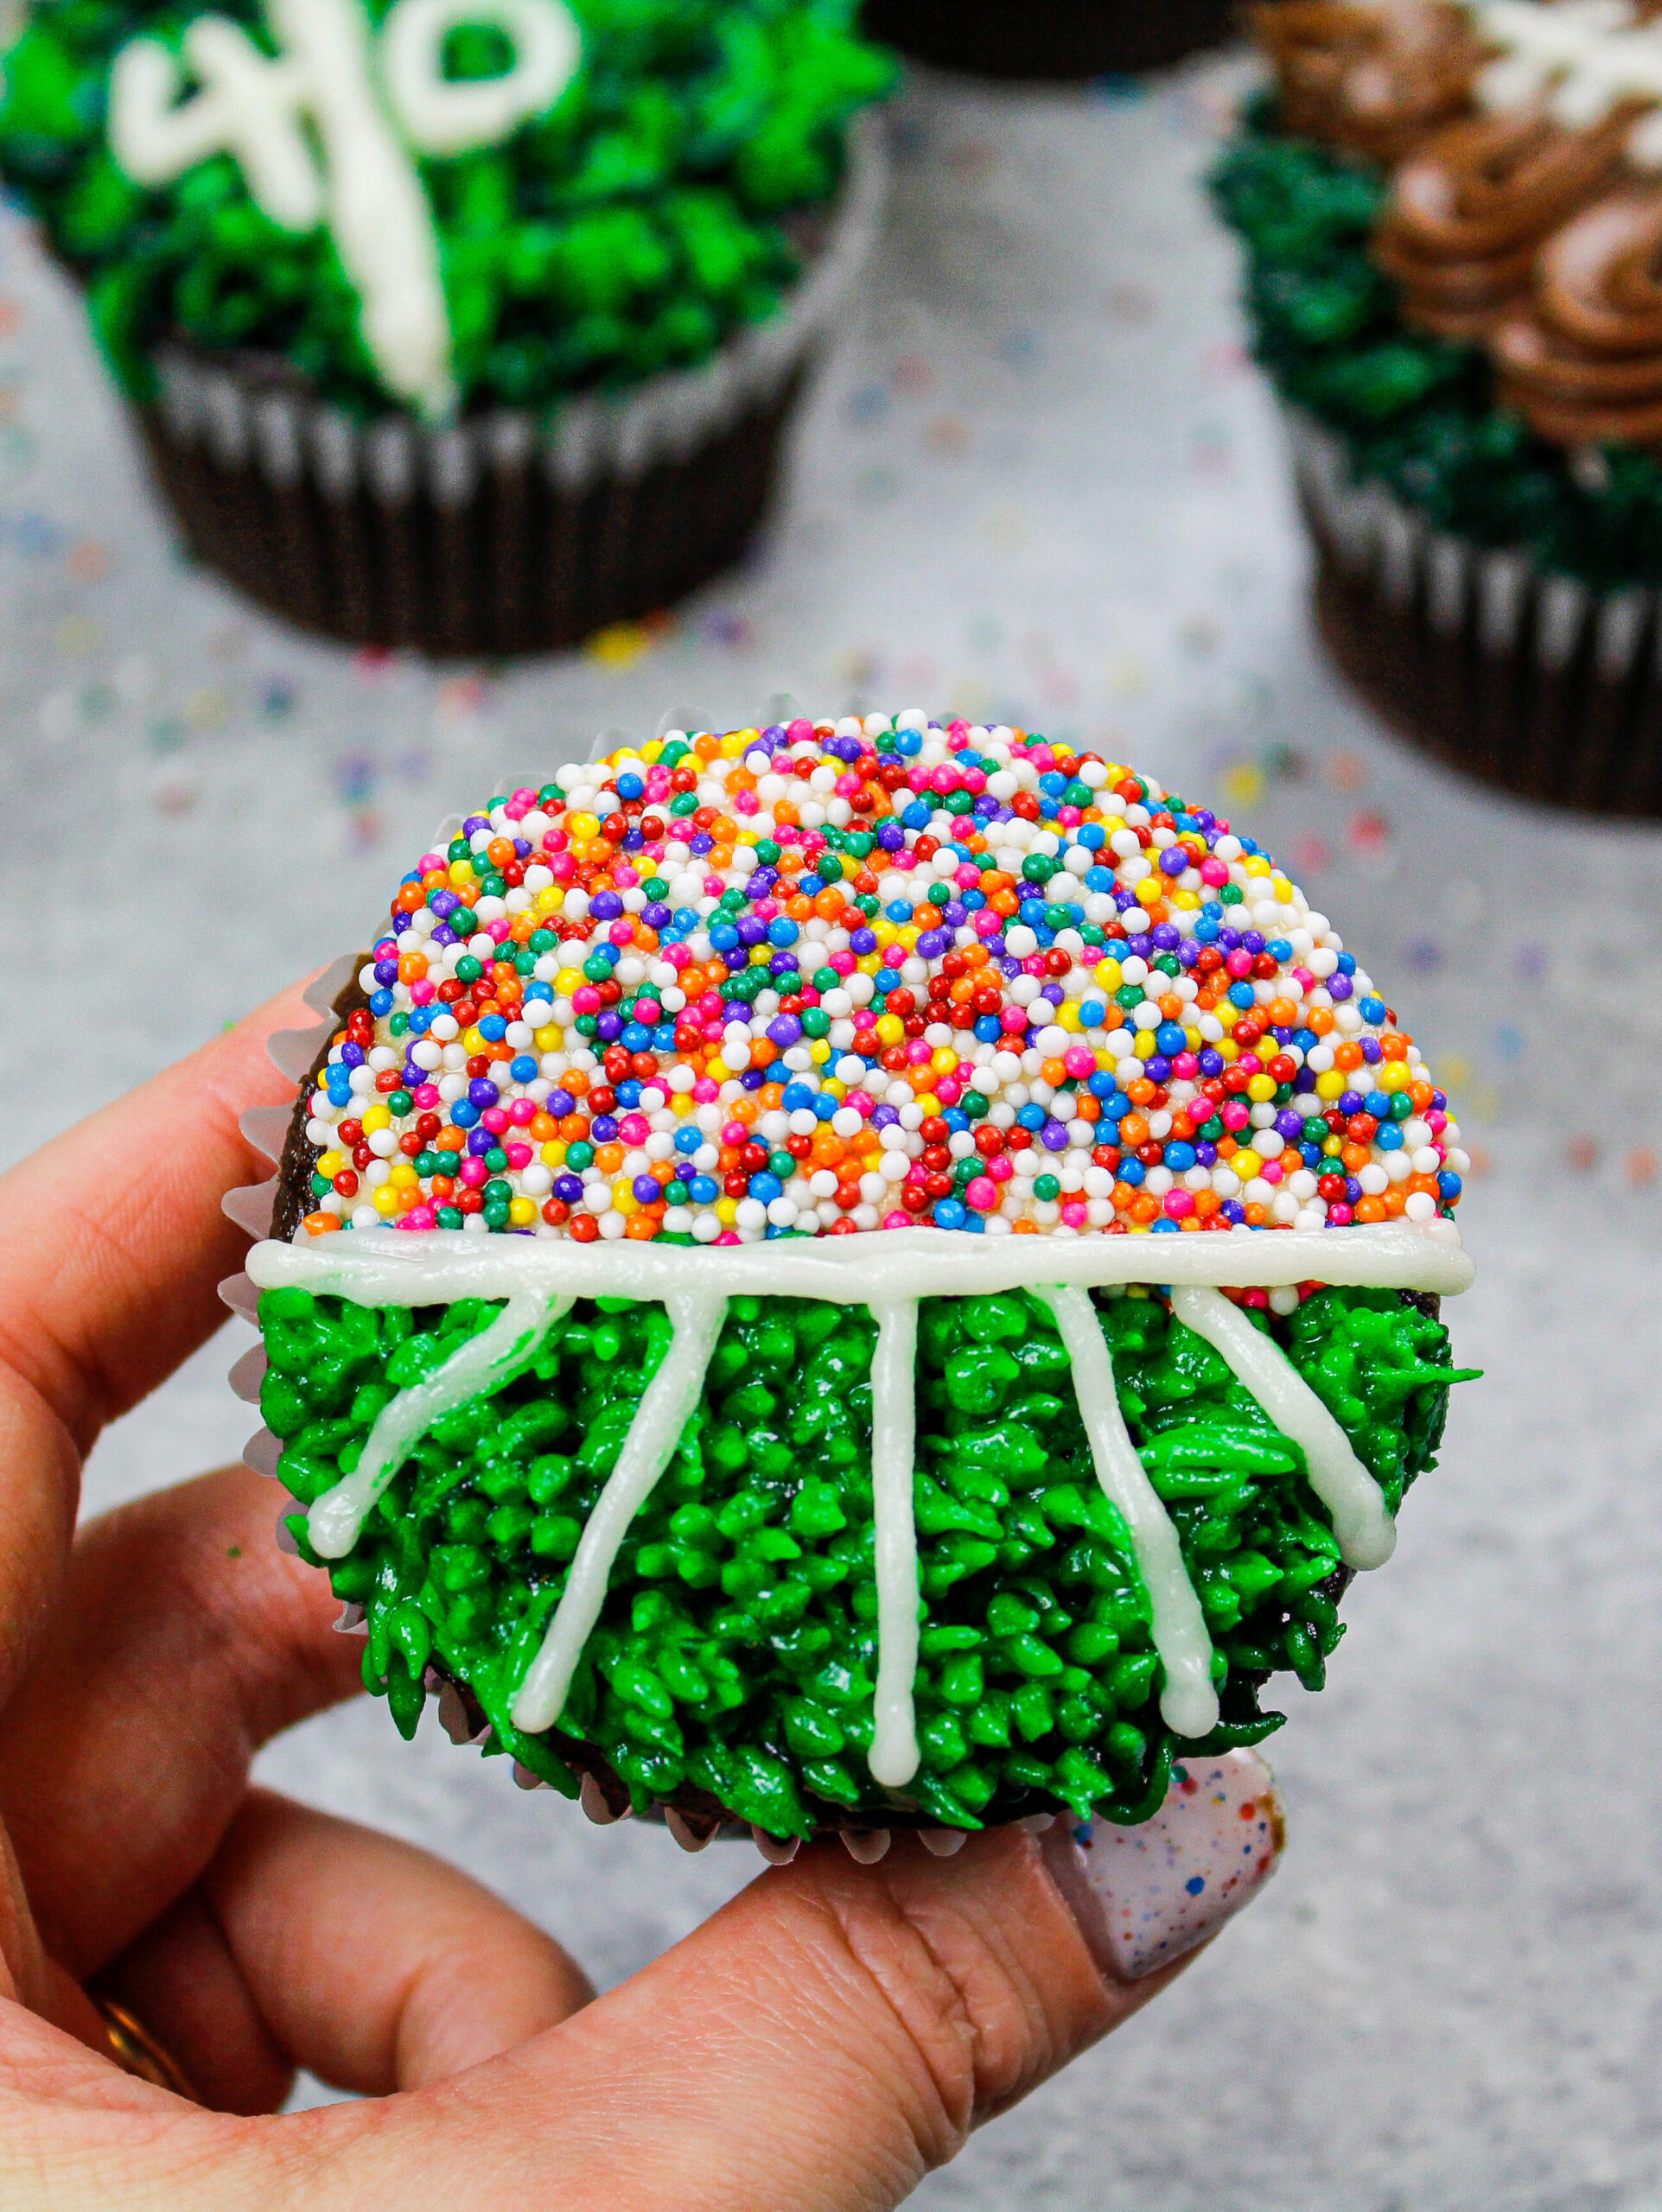 image of a football cupcake decorated to look like a football field with fans